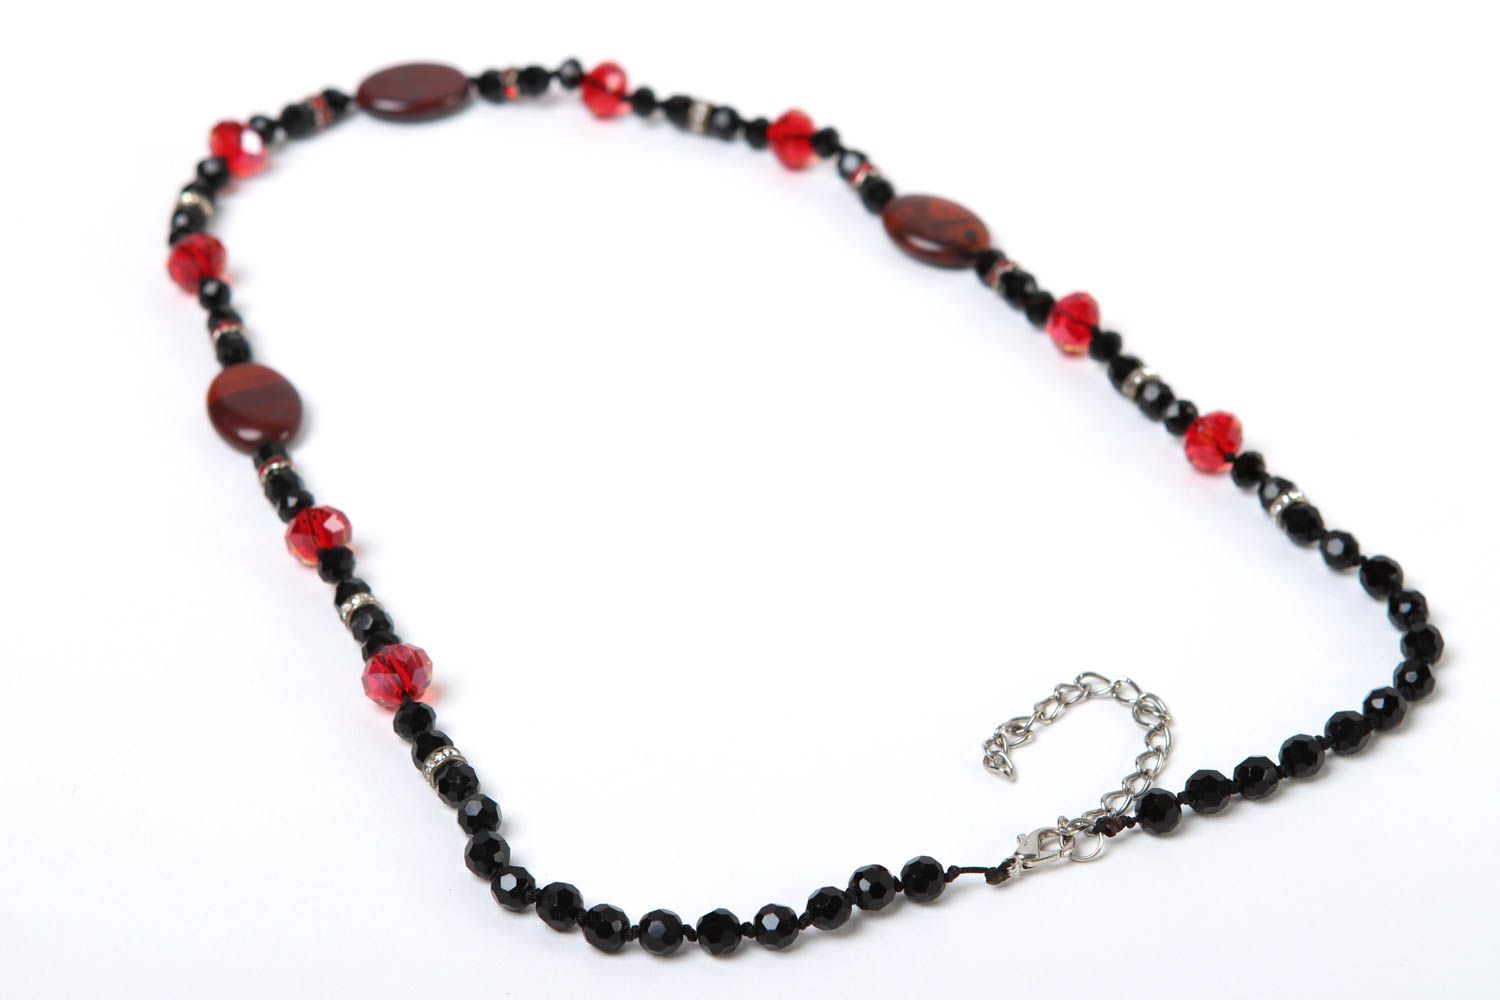 Stylish handmade beaded necklace gemstone bead necklace design gifts for her photo 4